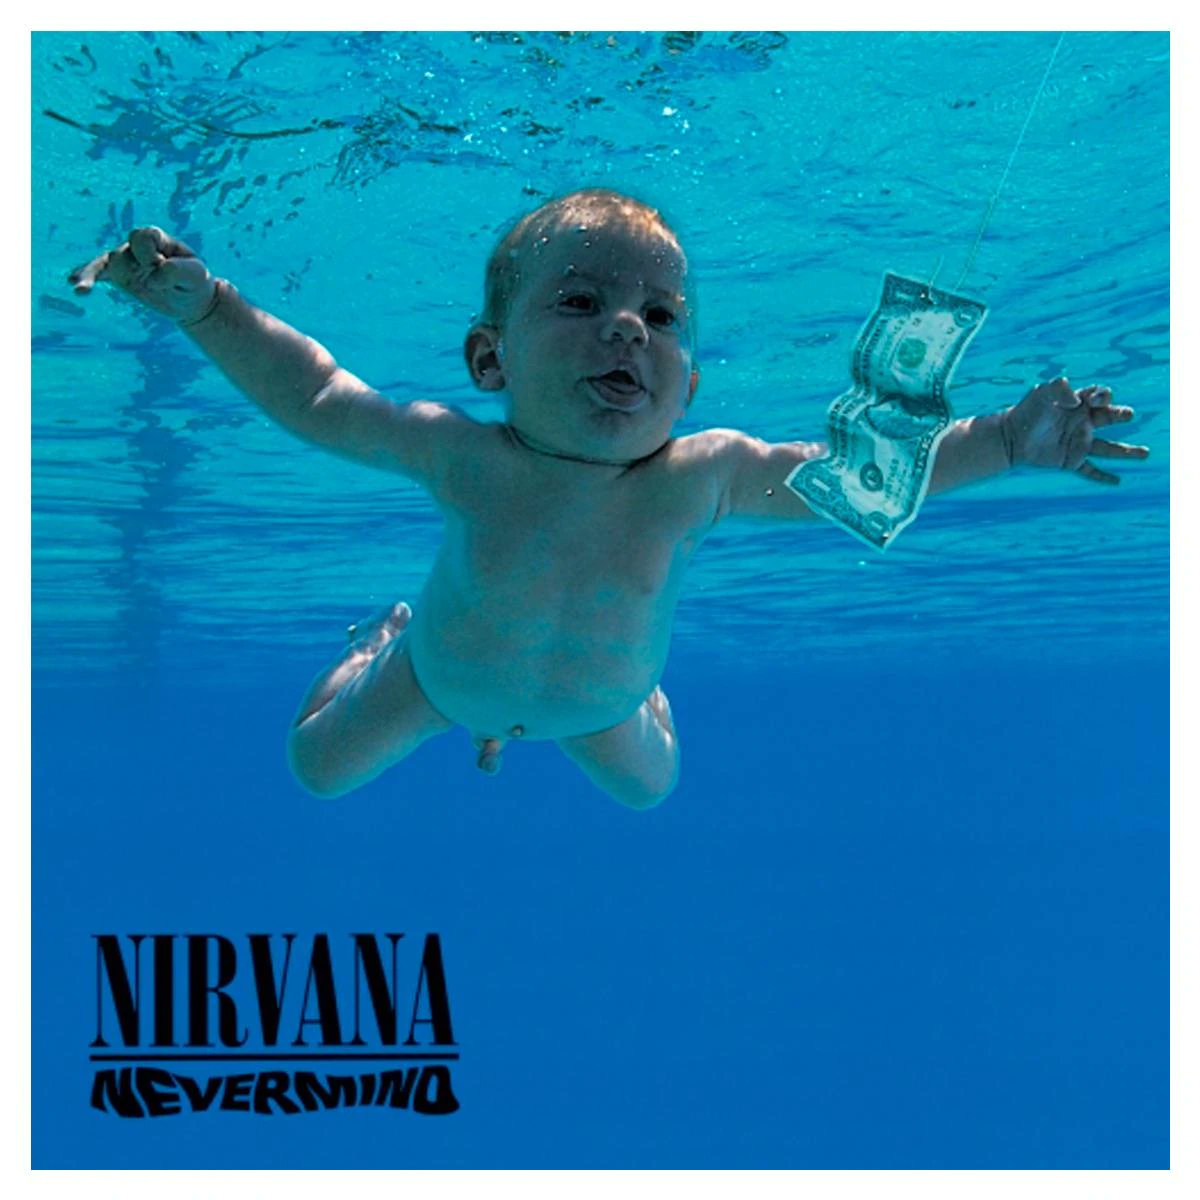 This weeks  #SelfIsolationTeamChallenge is to recreate the album artwork for  @Nirvana's  #Nevermind using items from around the house. Best effort wins... ...but WHO do you think will reign triumphant? Vote using the poll below!